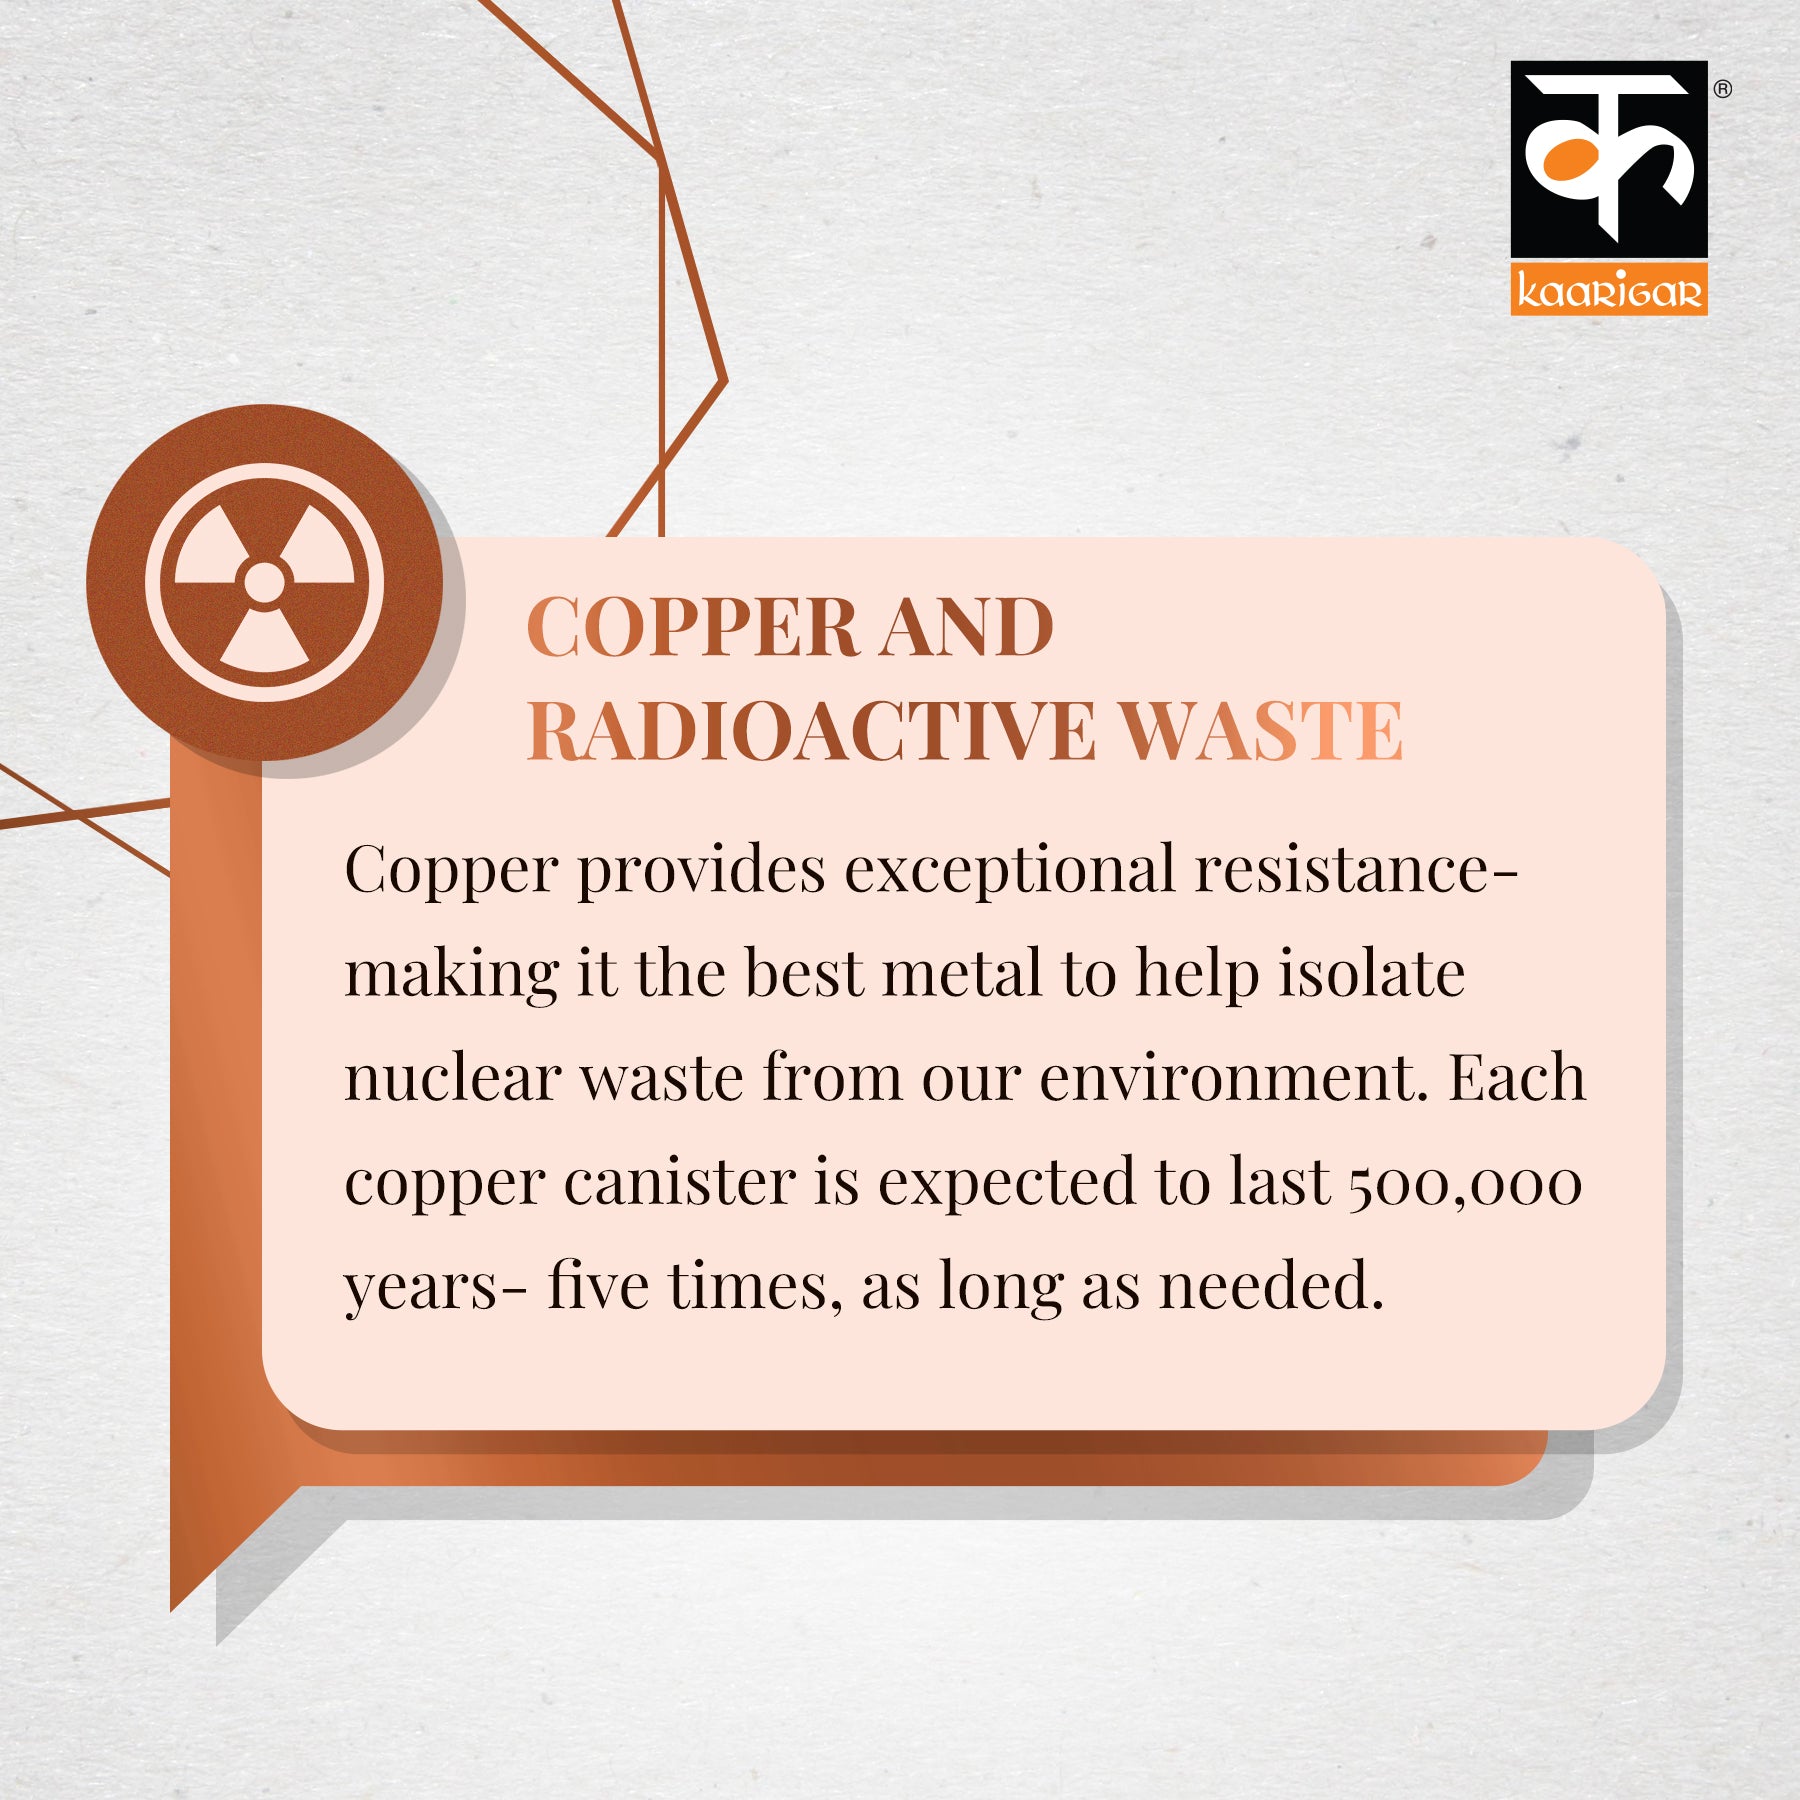 Copper and Radioactive Waste